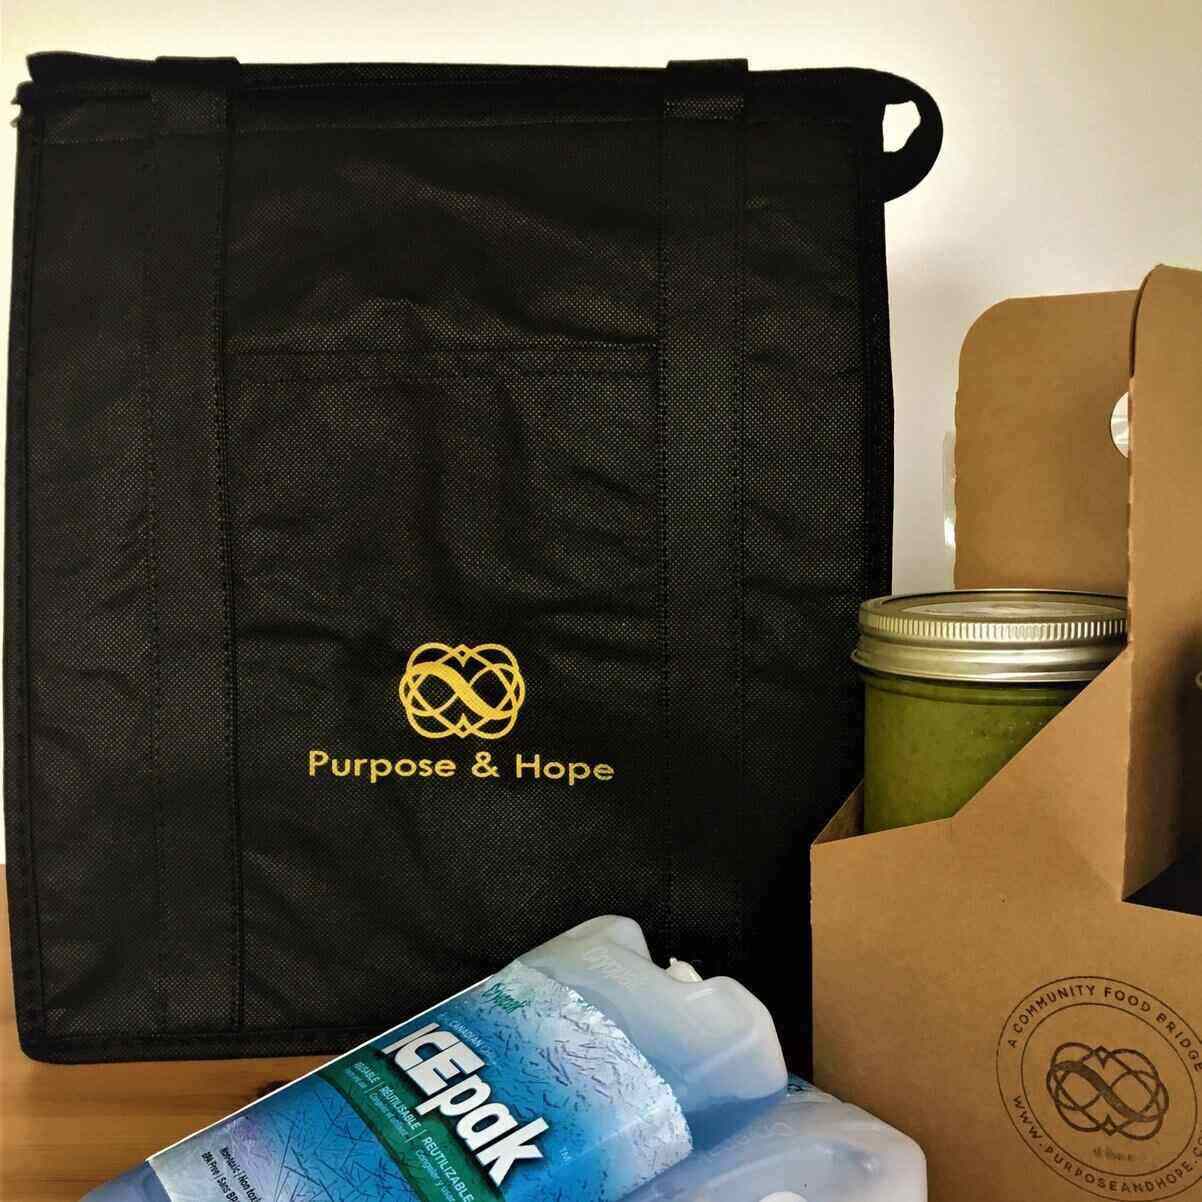  Purpose & Hope tote bag with logo behind ice packs and green soup jar.